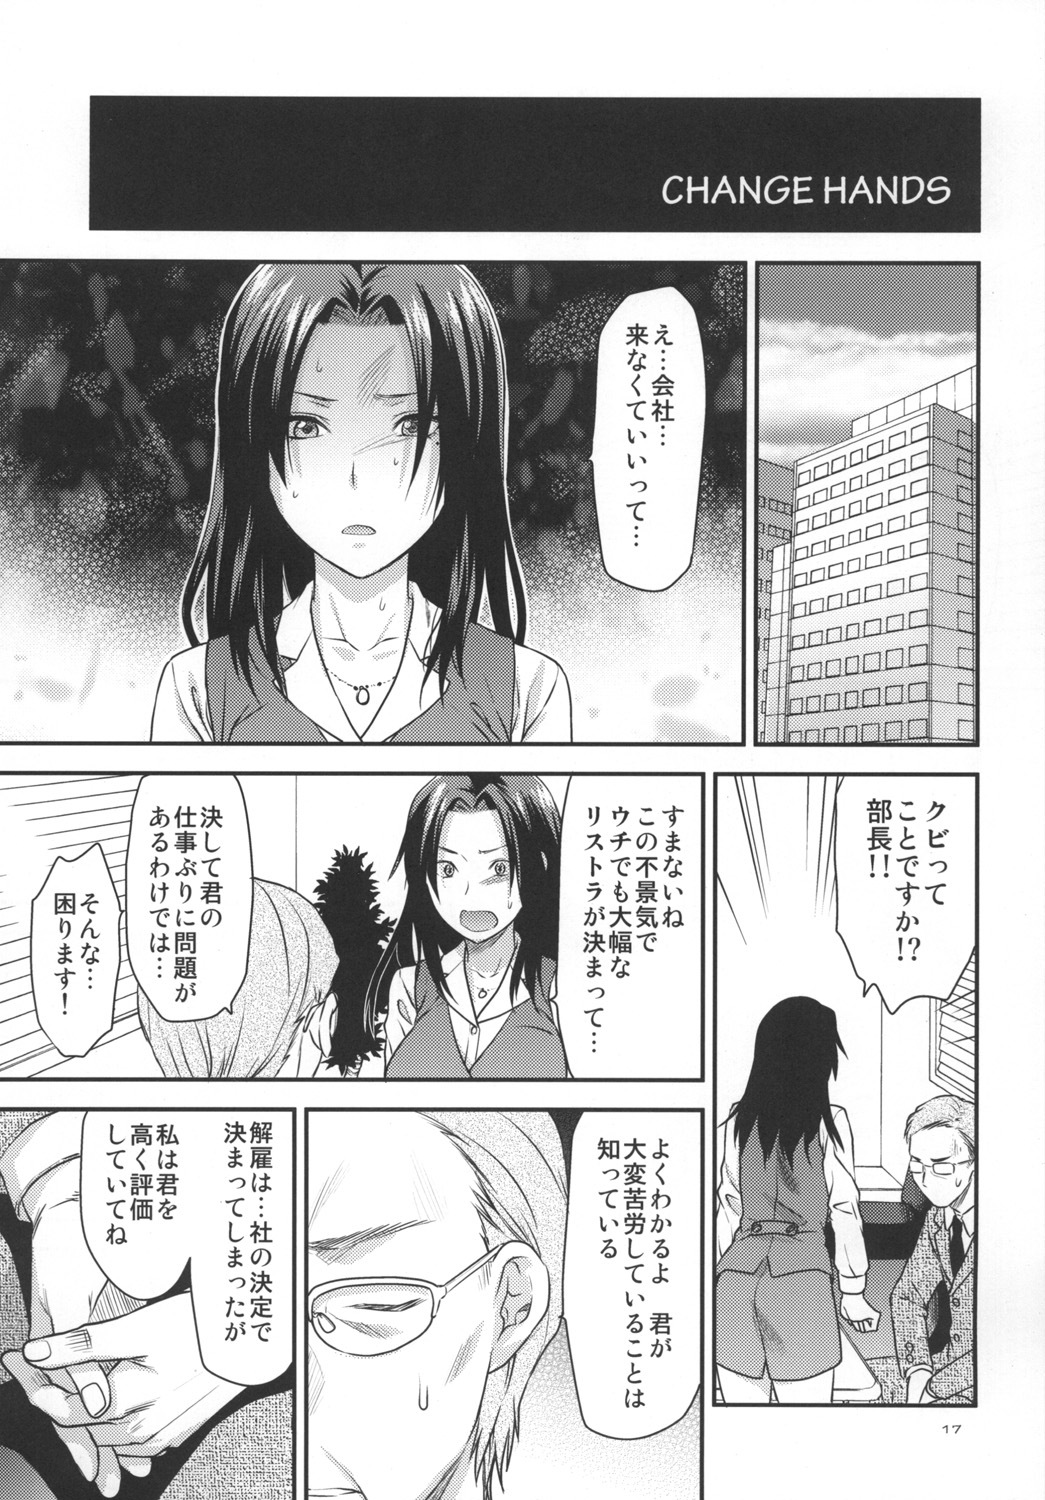 [Lv.X+ (Yuzuki N Dash)] Another Another World [Digital] page 16 full